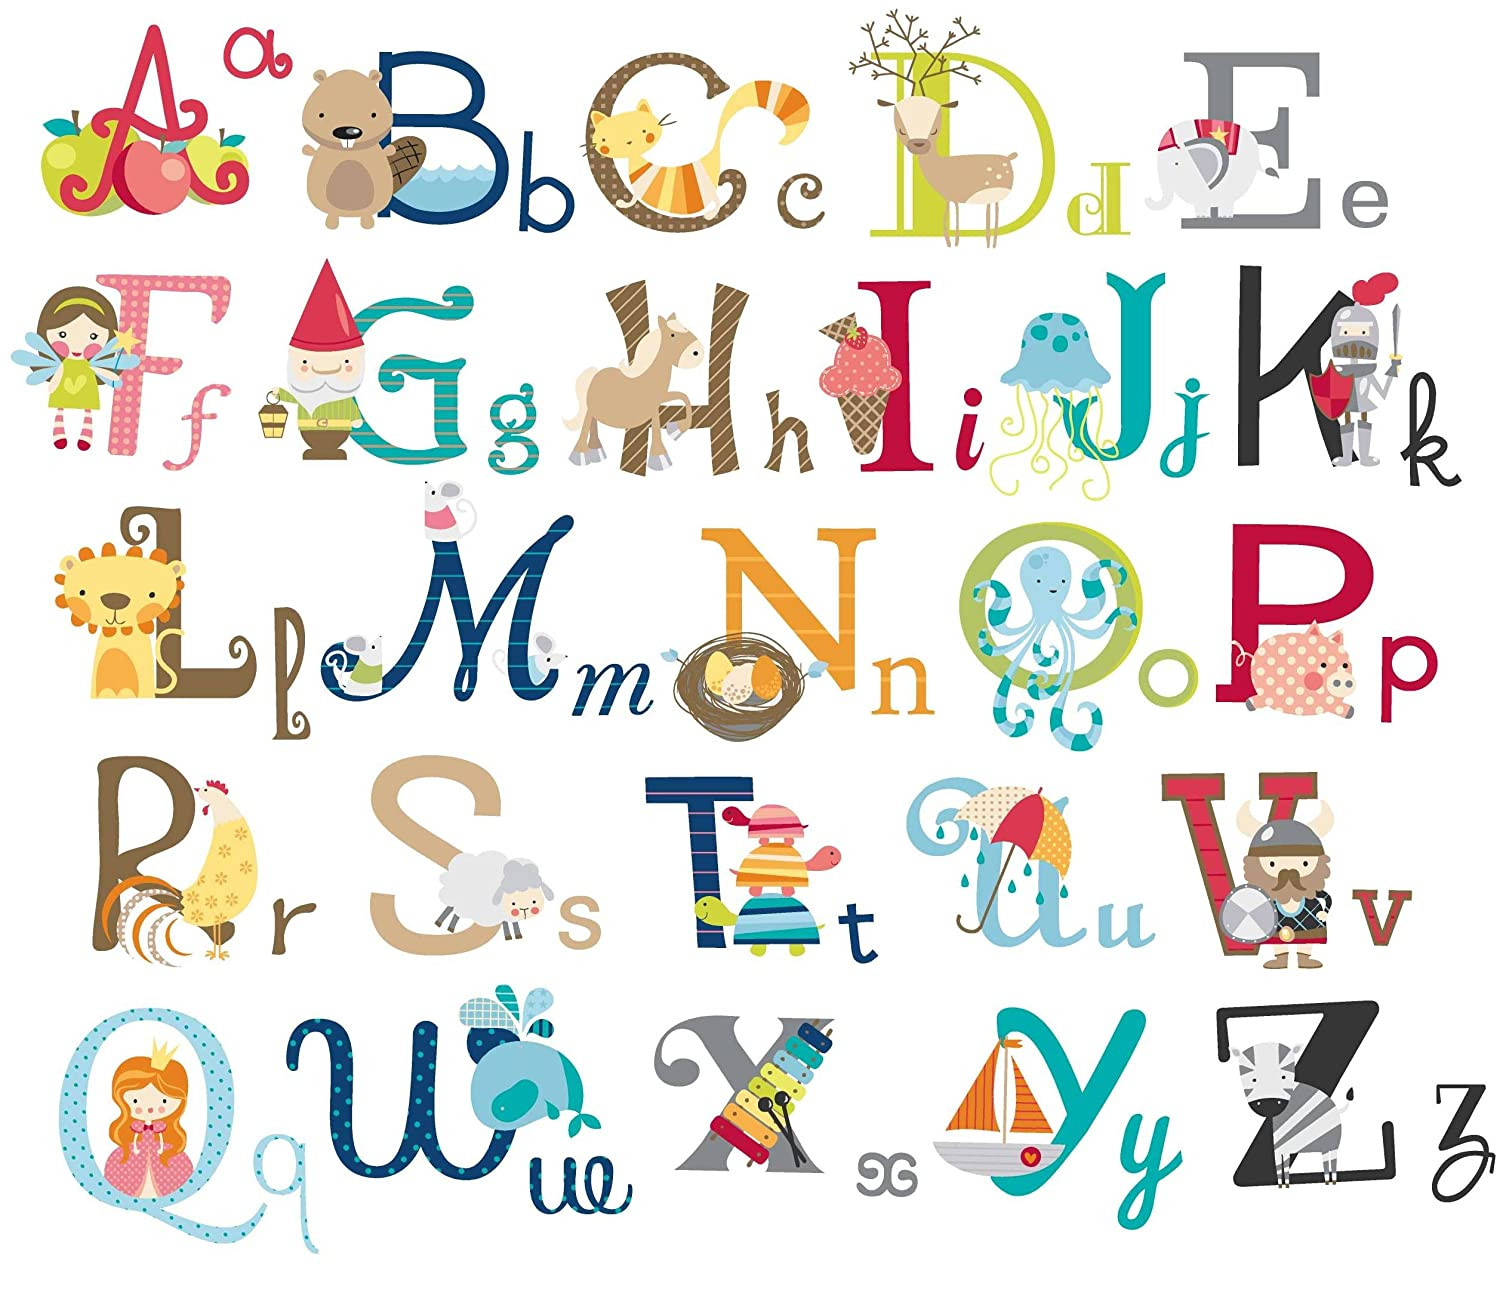 Kids Room Letters Lovely Big Graphic Alphabet Letters Kids Room Nursery Wall Decal